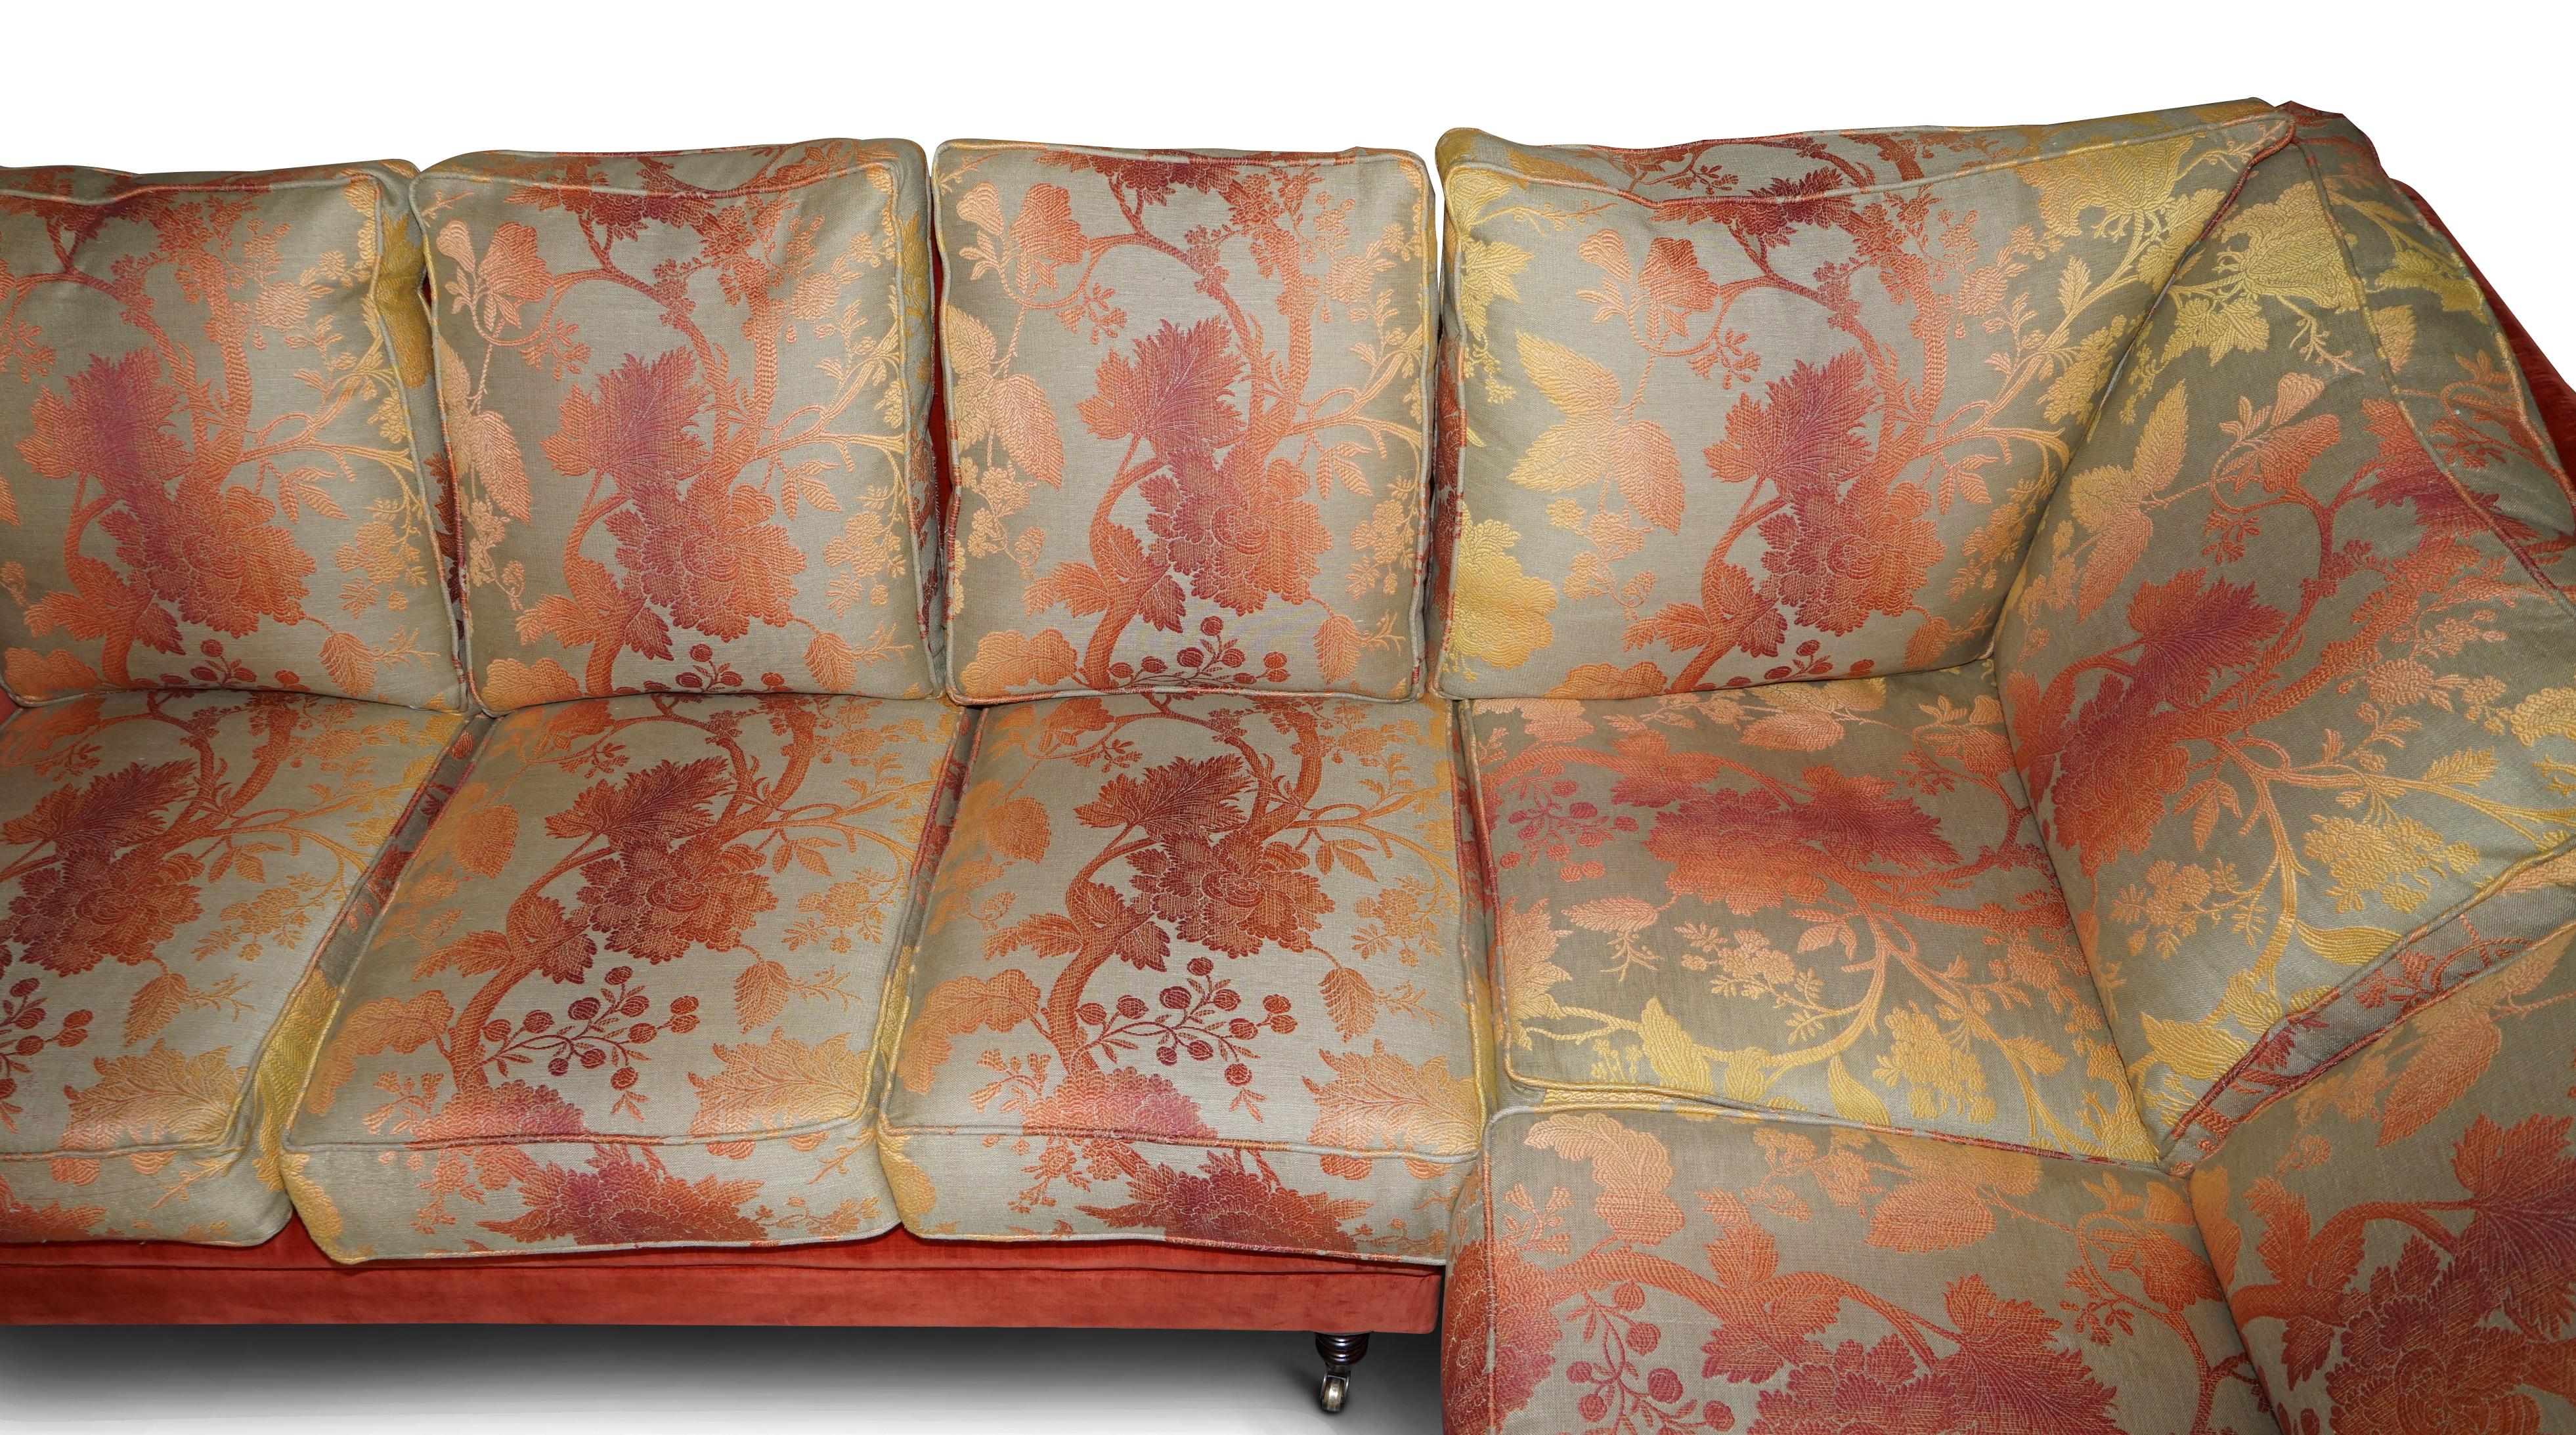 George Smith Signature Large 7 Seater Corner Sofa with Velour Floral Upholstery For Sale 2